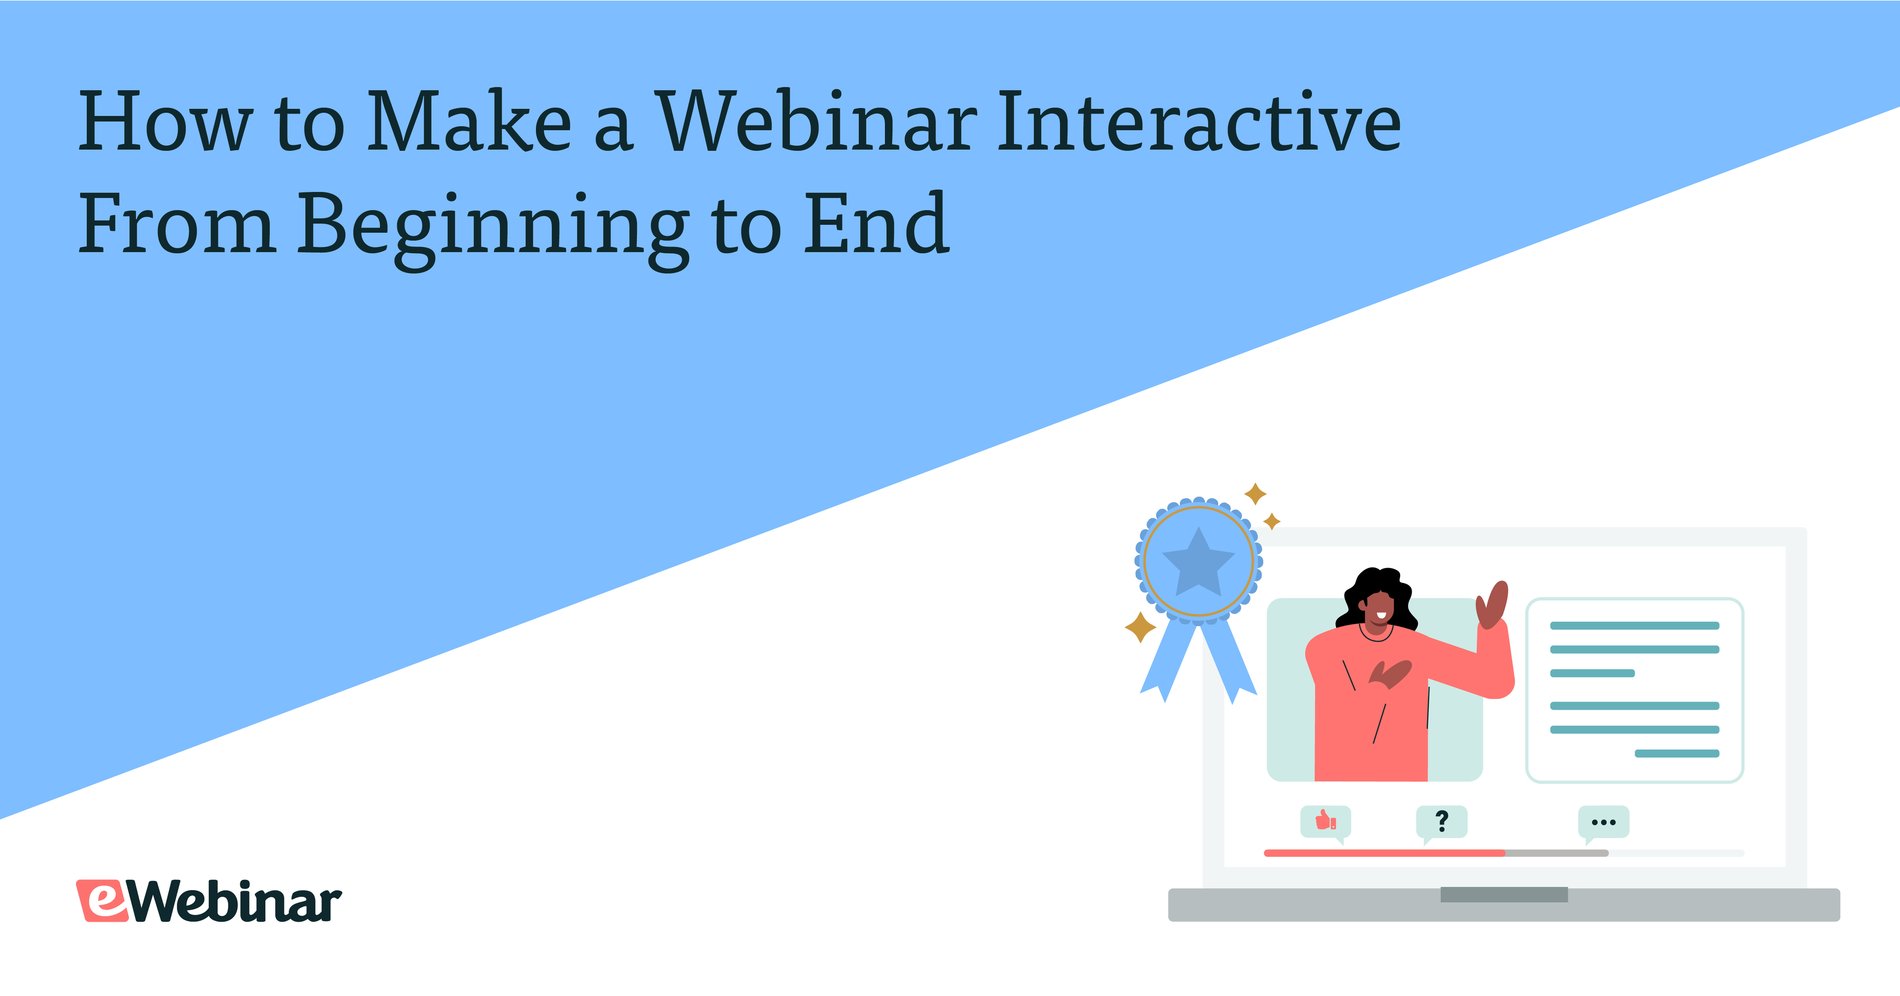 How to Make a Webinar Interactive From Beginning to End